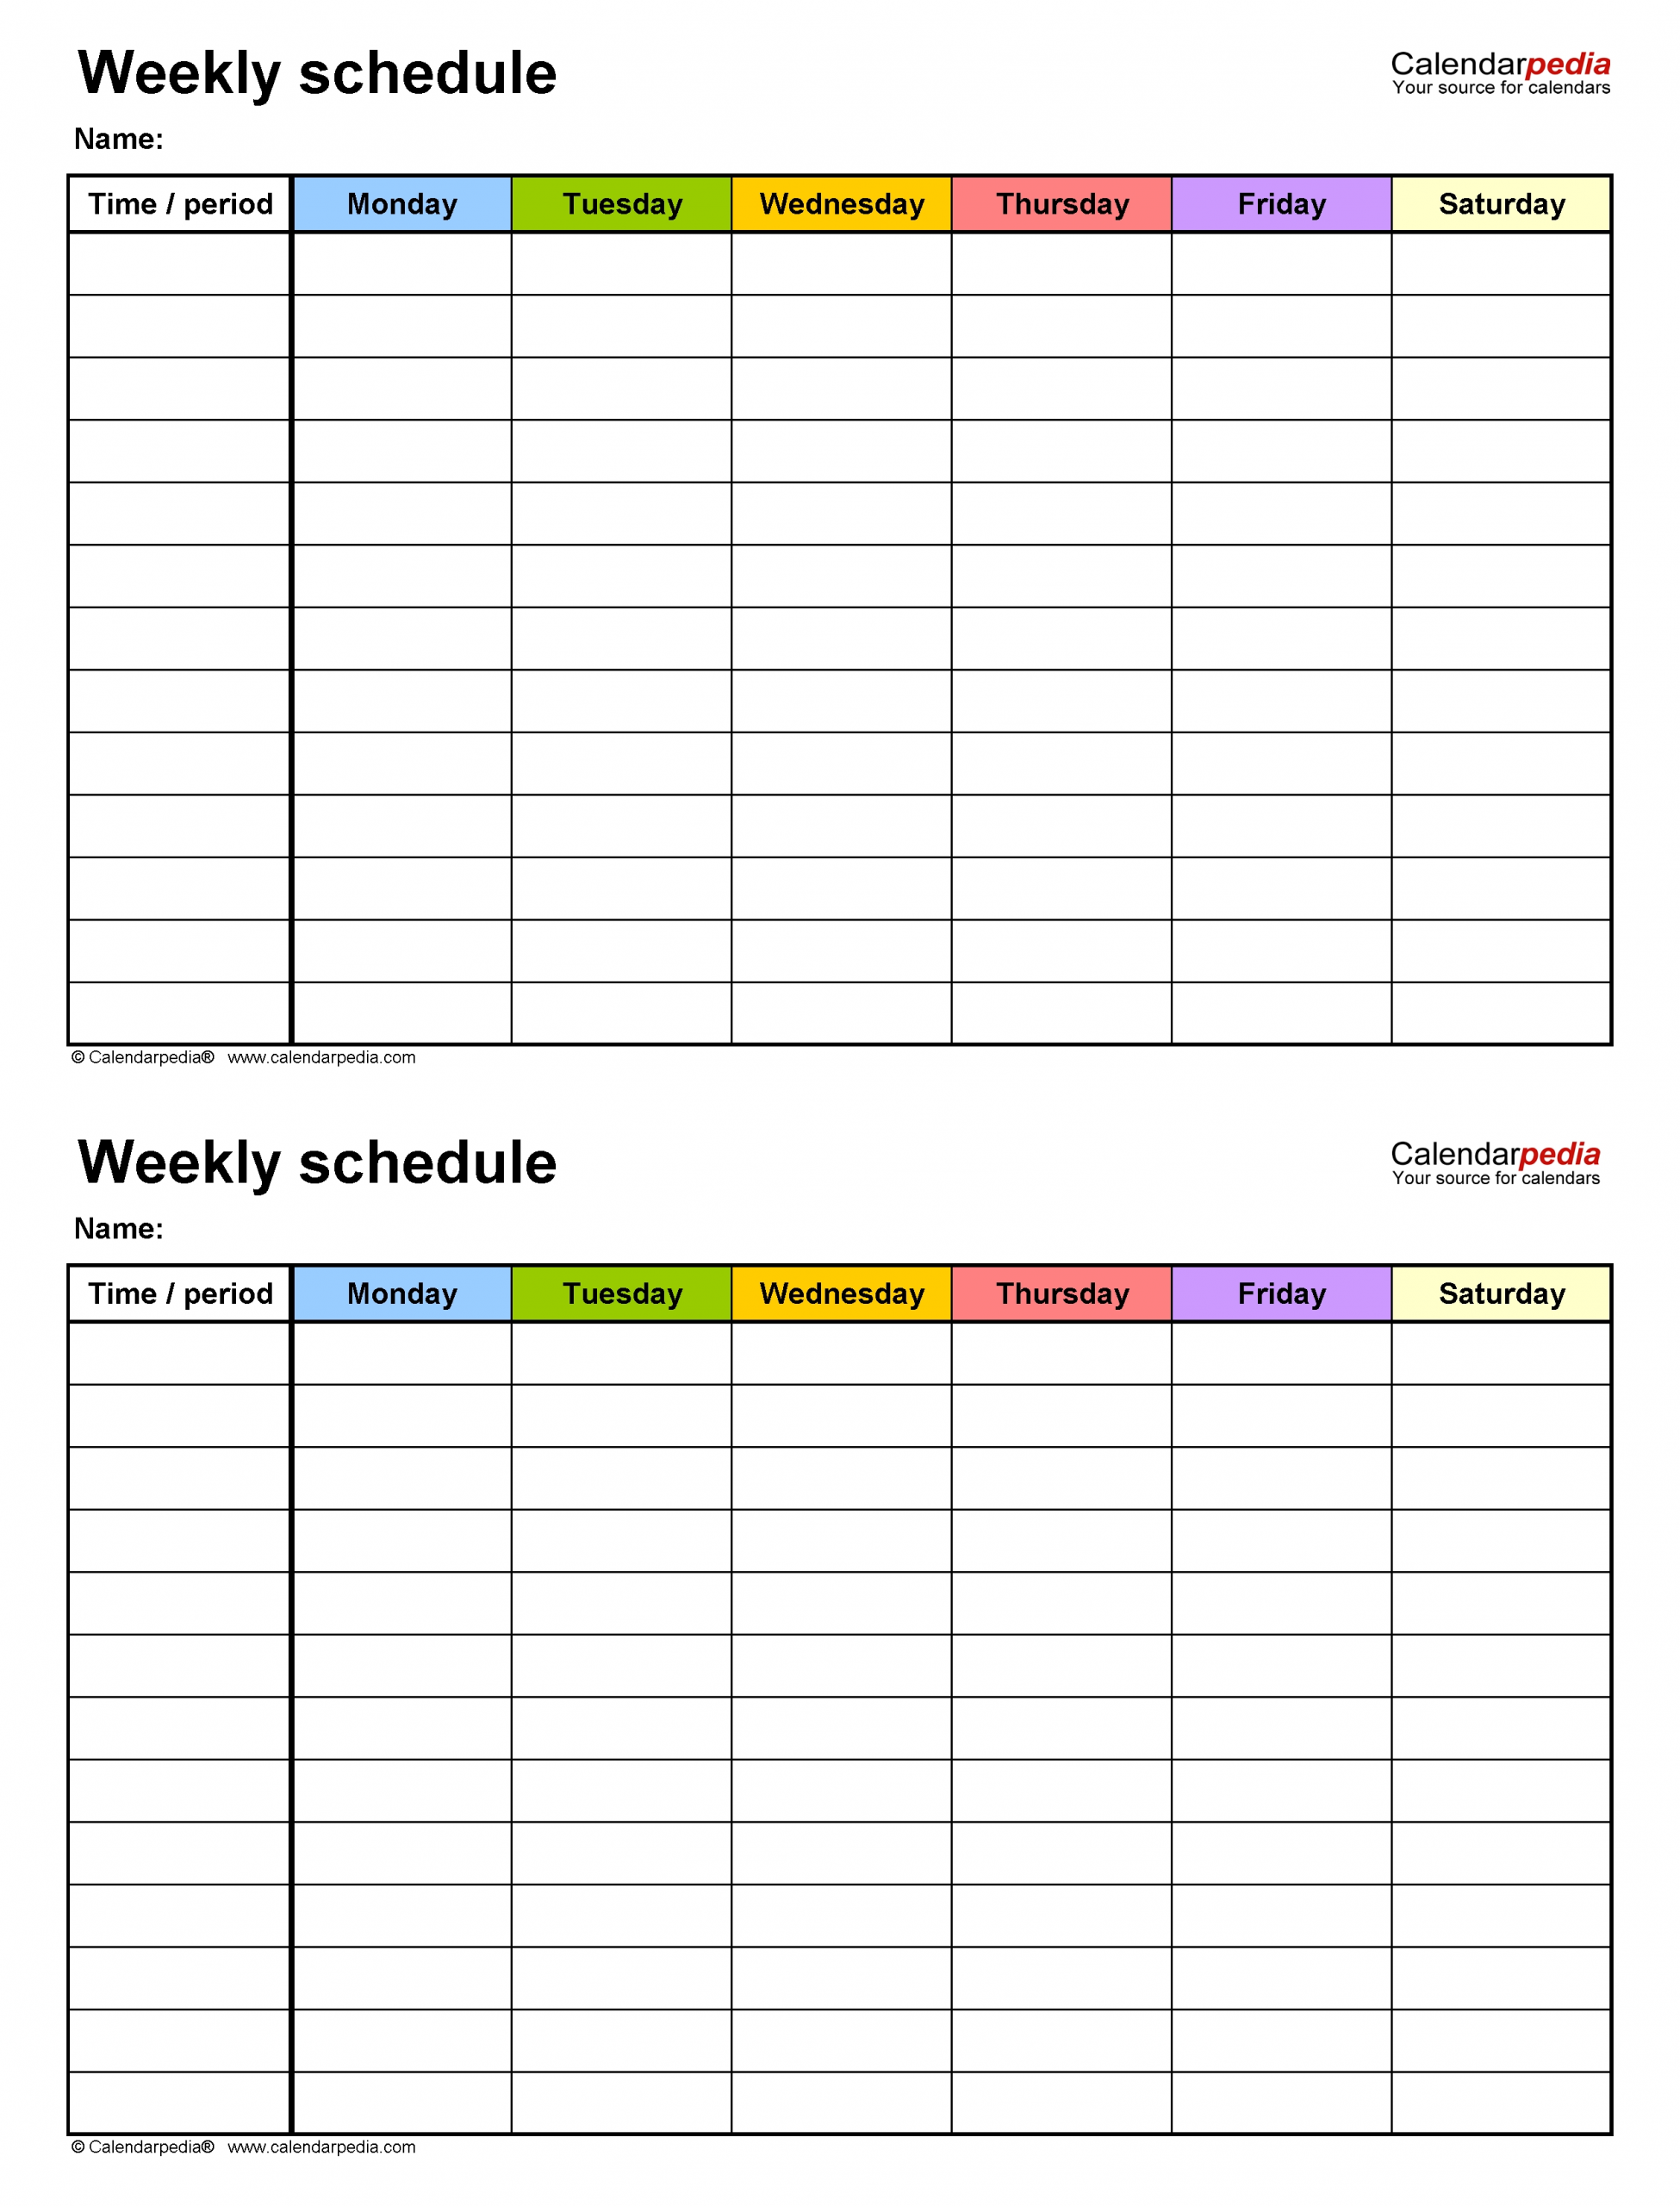 Free Weekly Schedule Templates For Excel - 18 Templates 9 Week Calendar Template